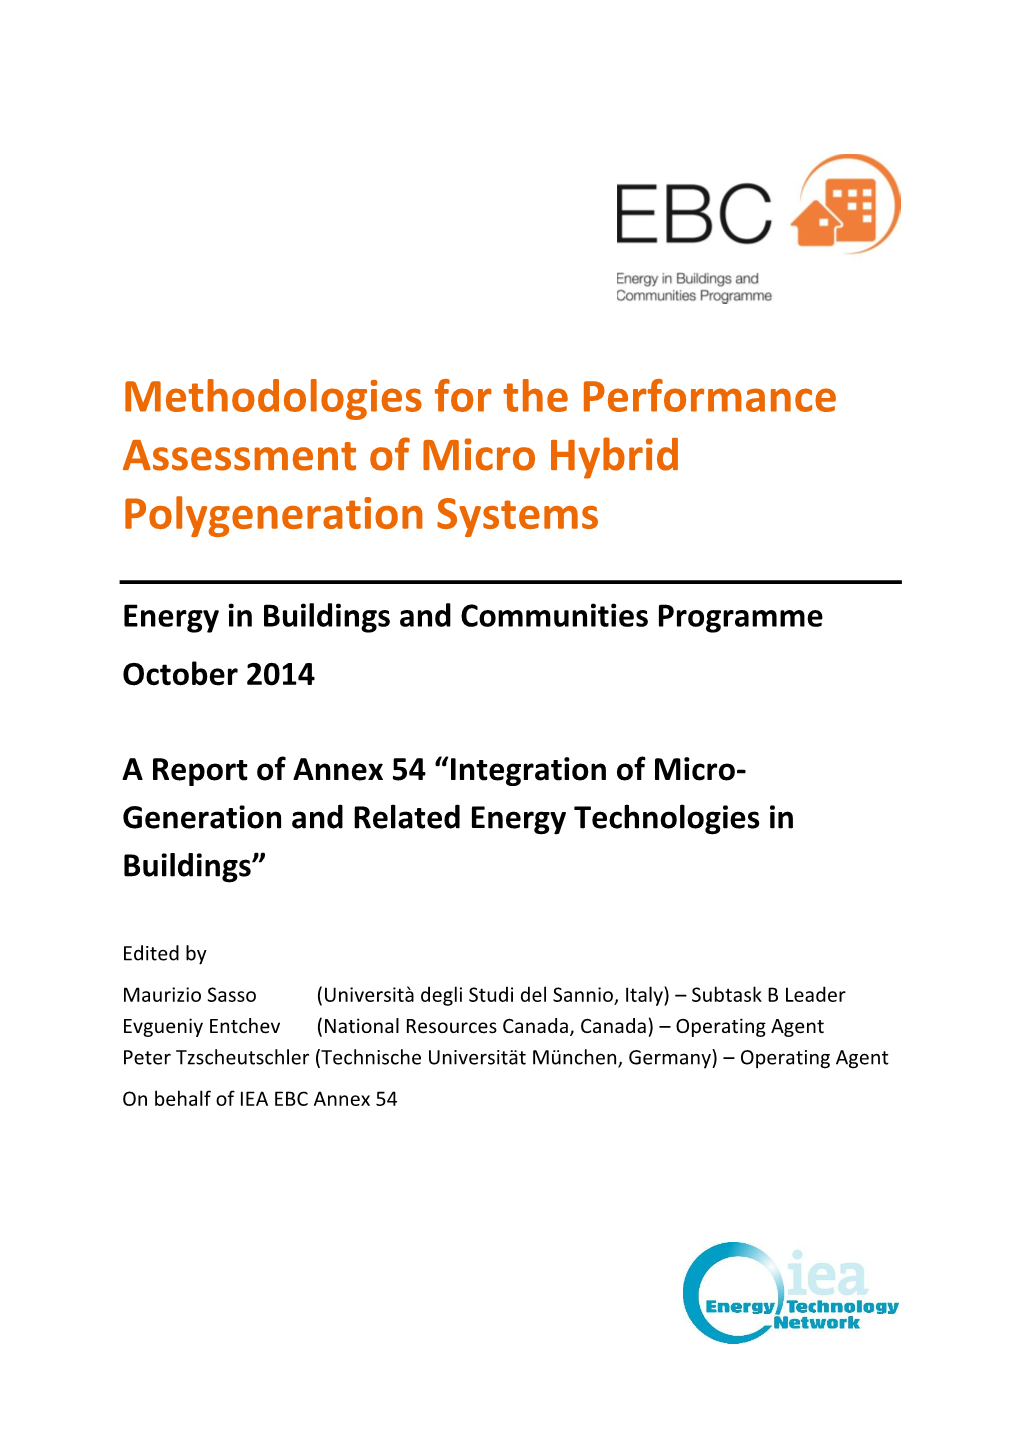 Methodologies for the Performance Assessment of Micro Hybrid Polygeneration Systems